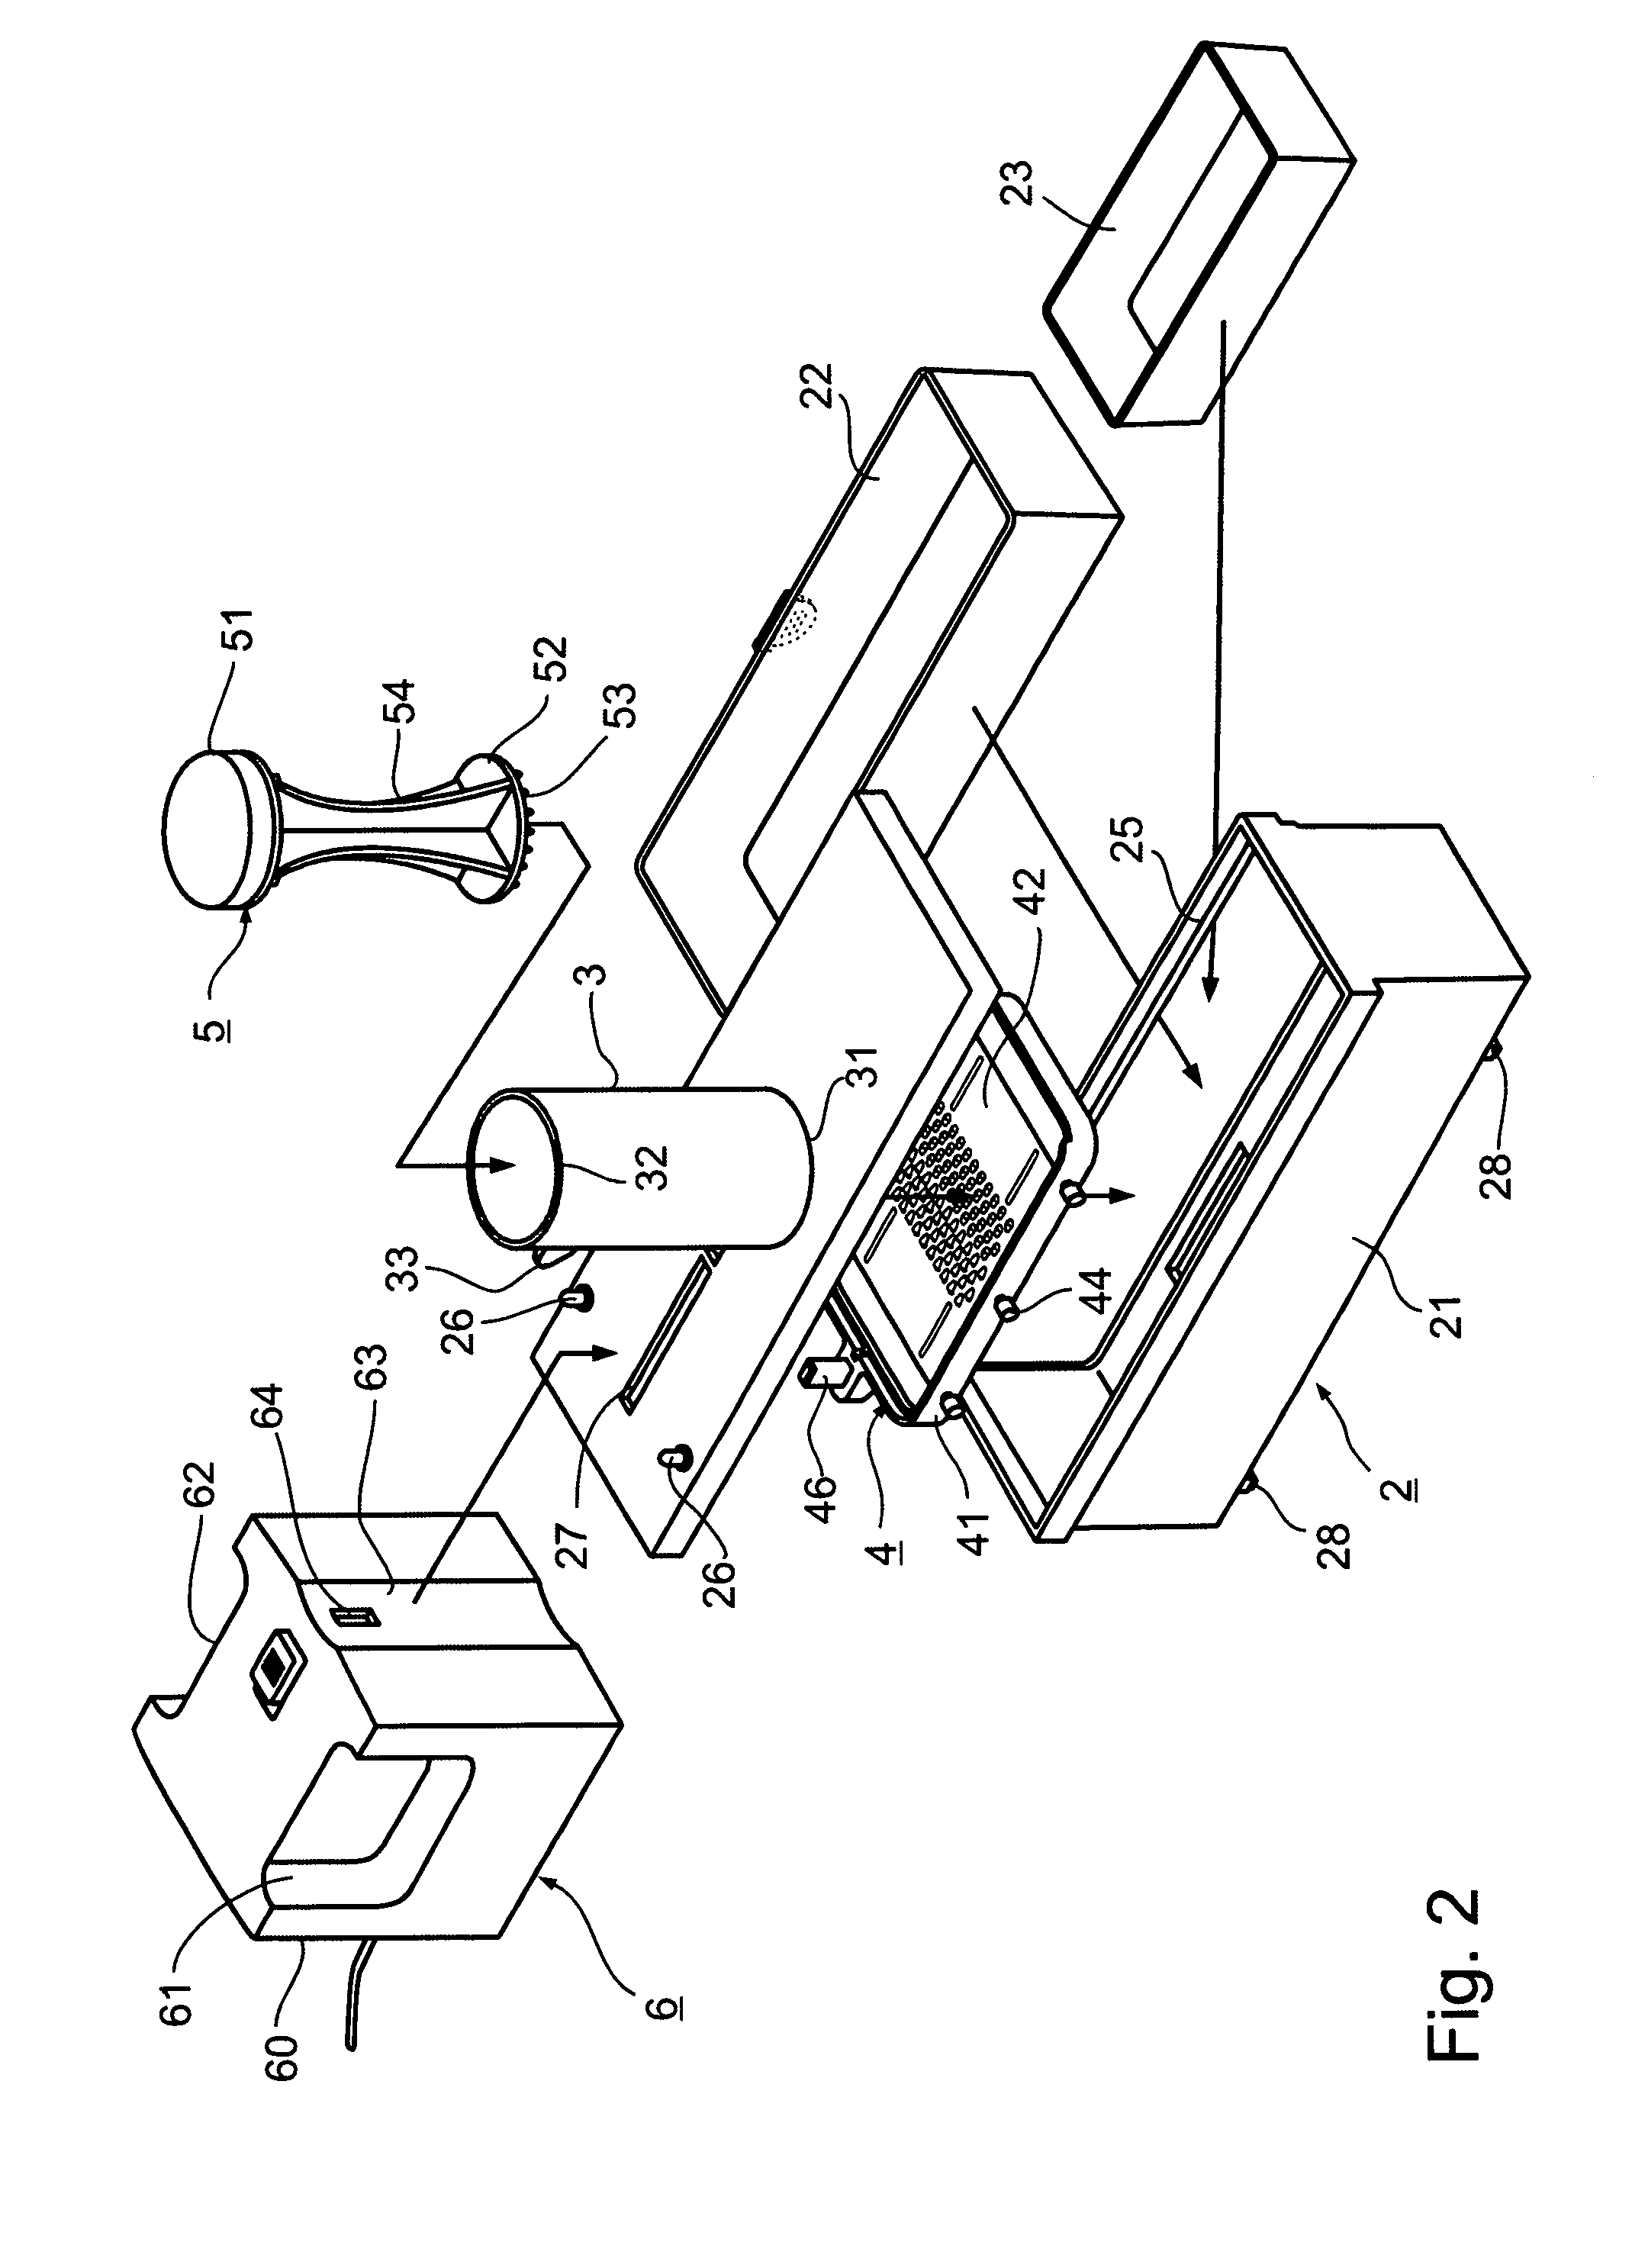 Food processor appliance for cutting food articles into desired forms